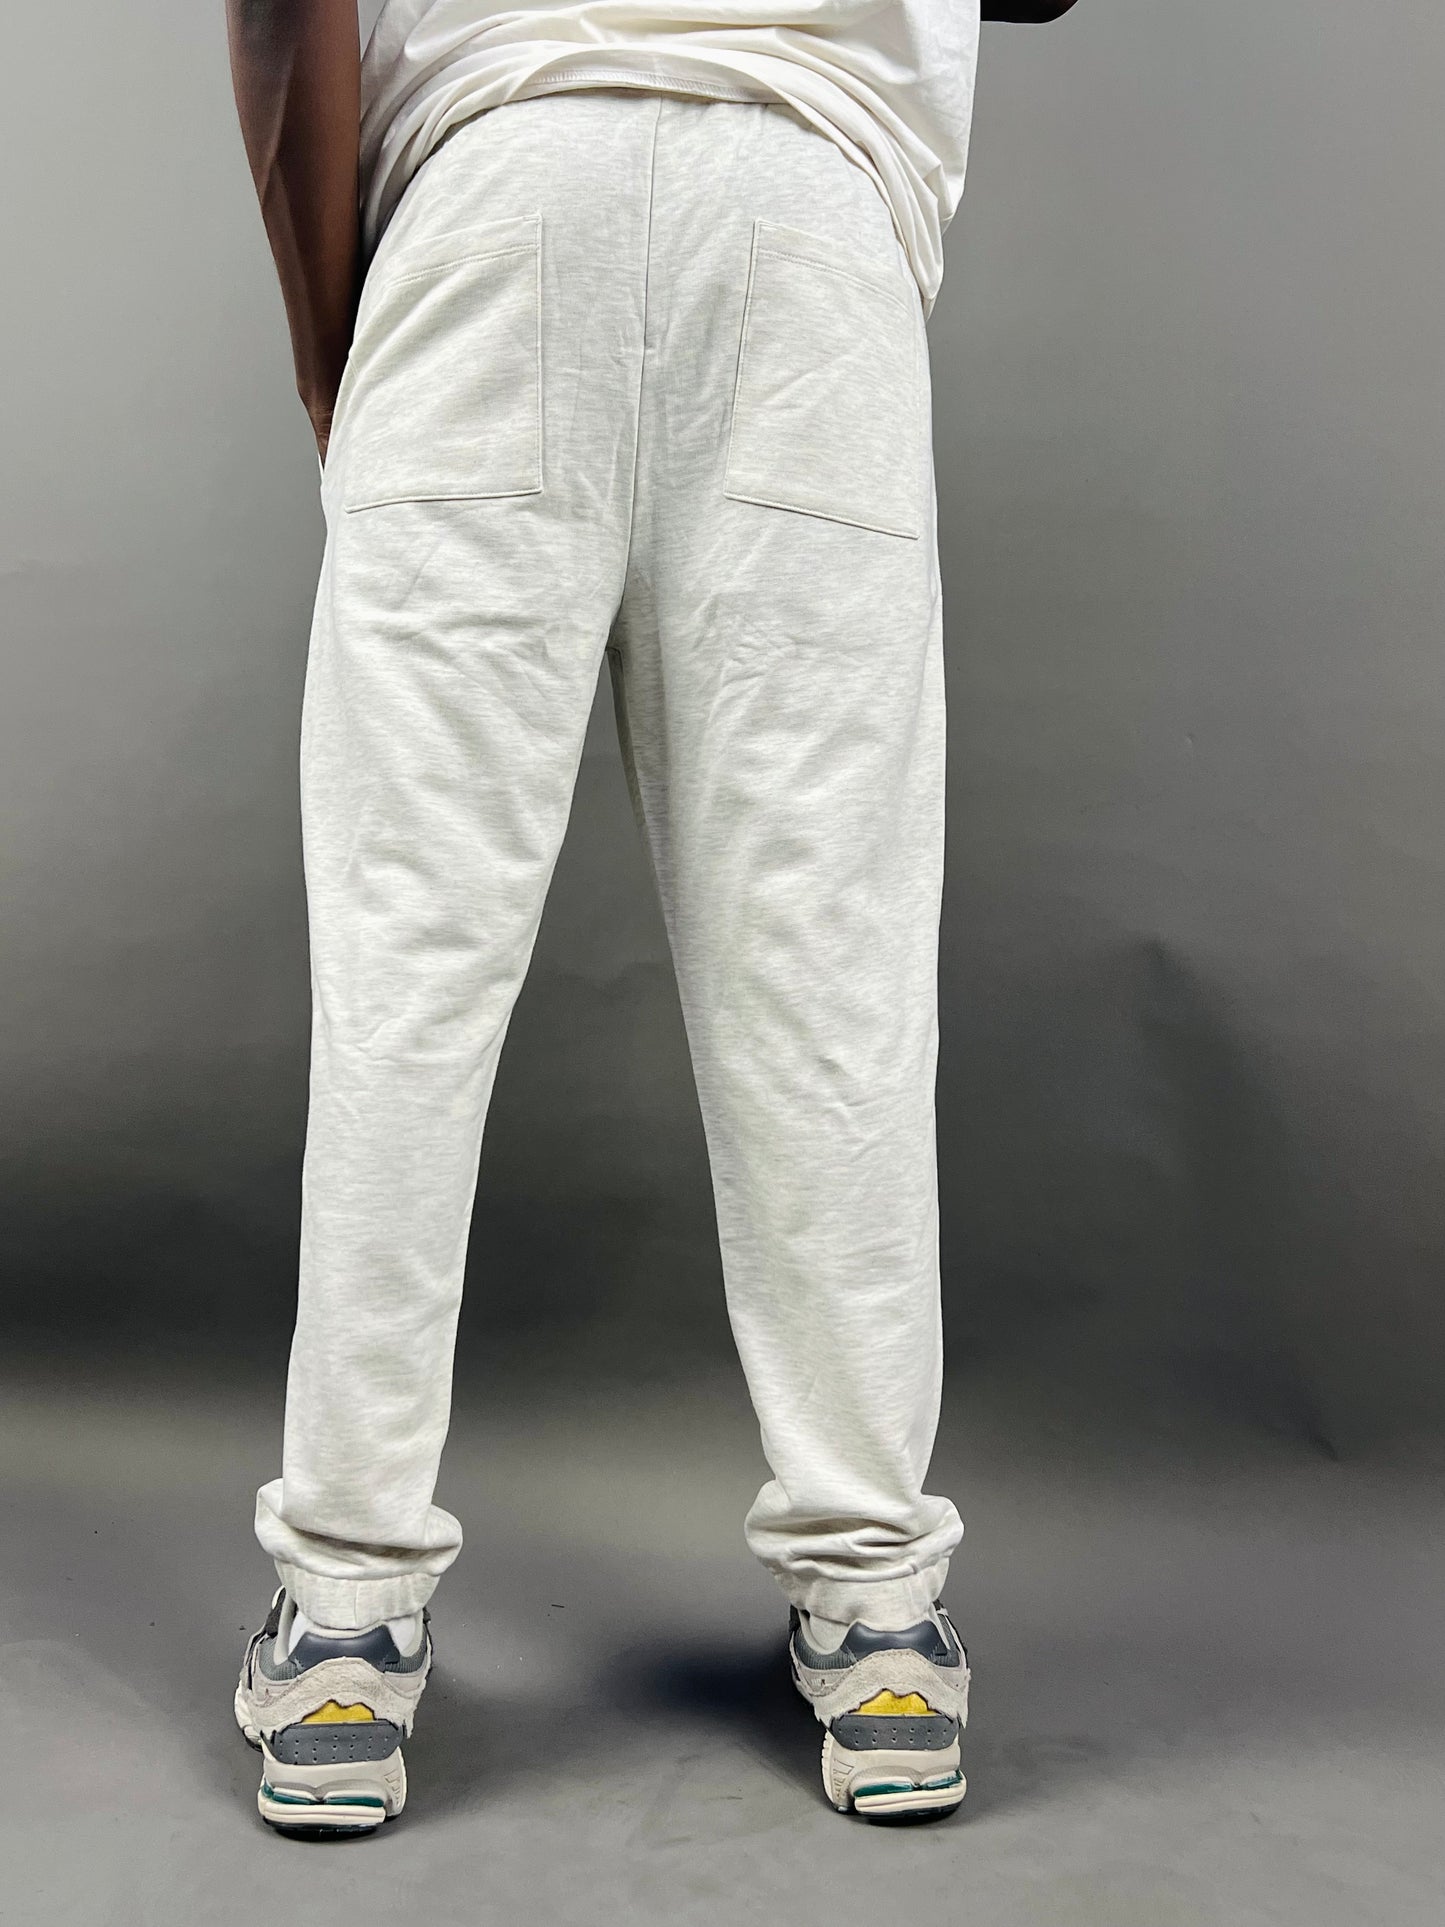 Reserved Jogger pants in marl gray